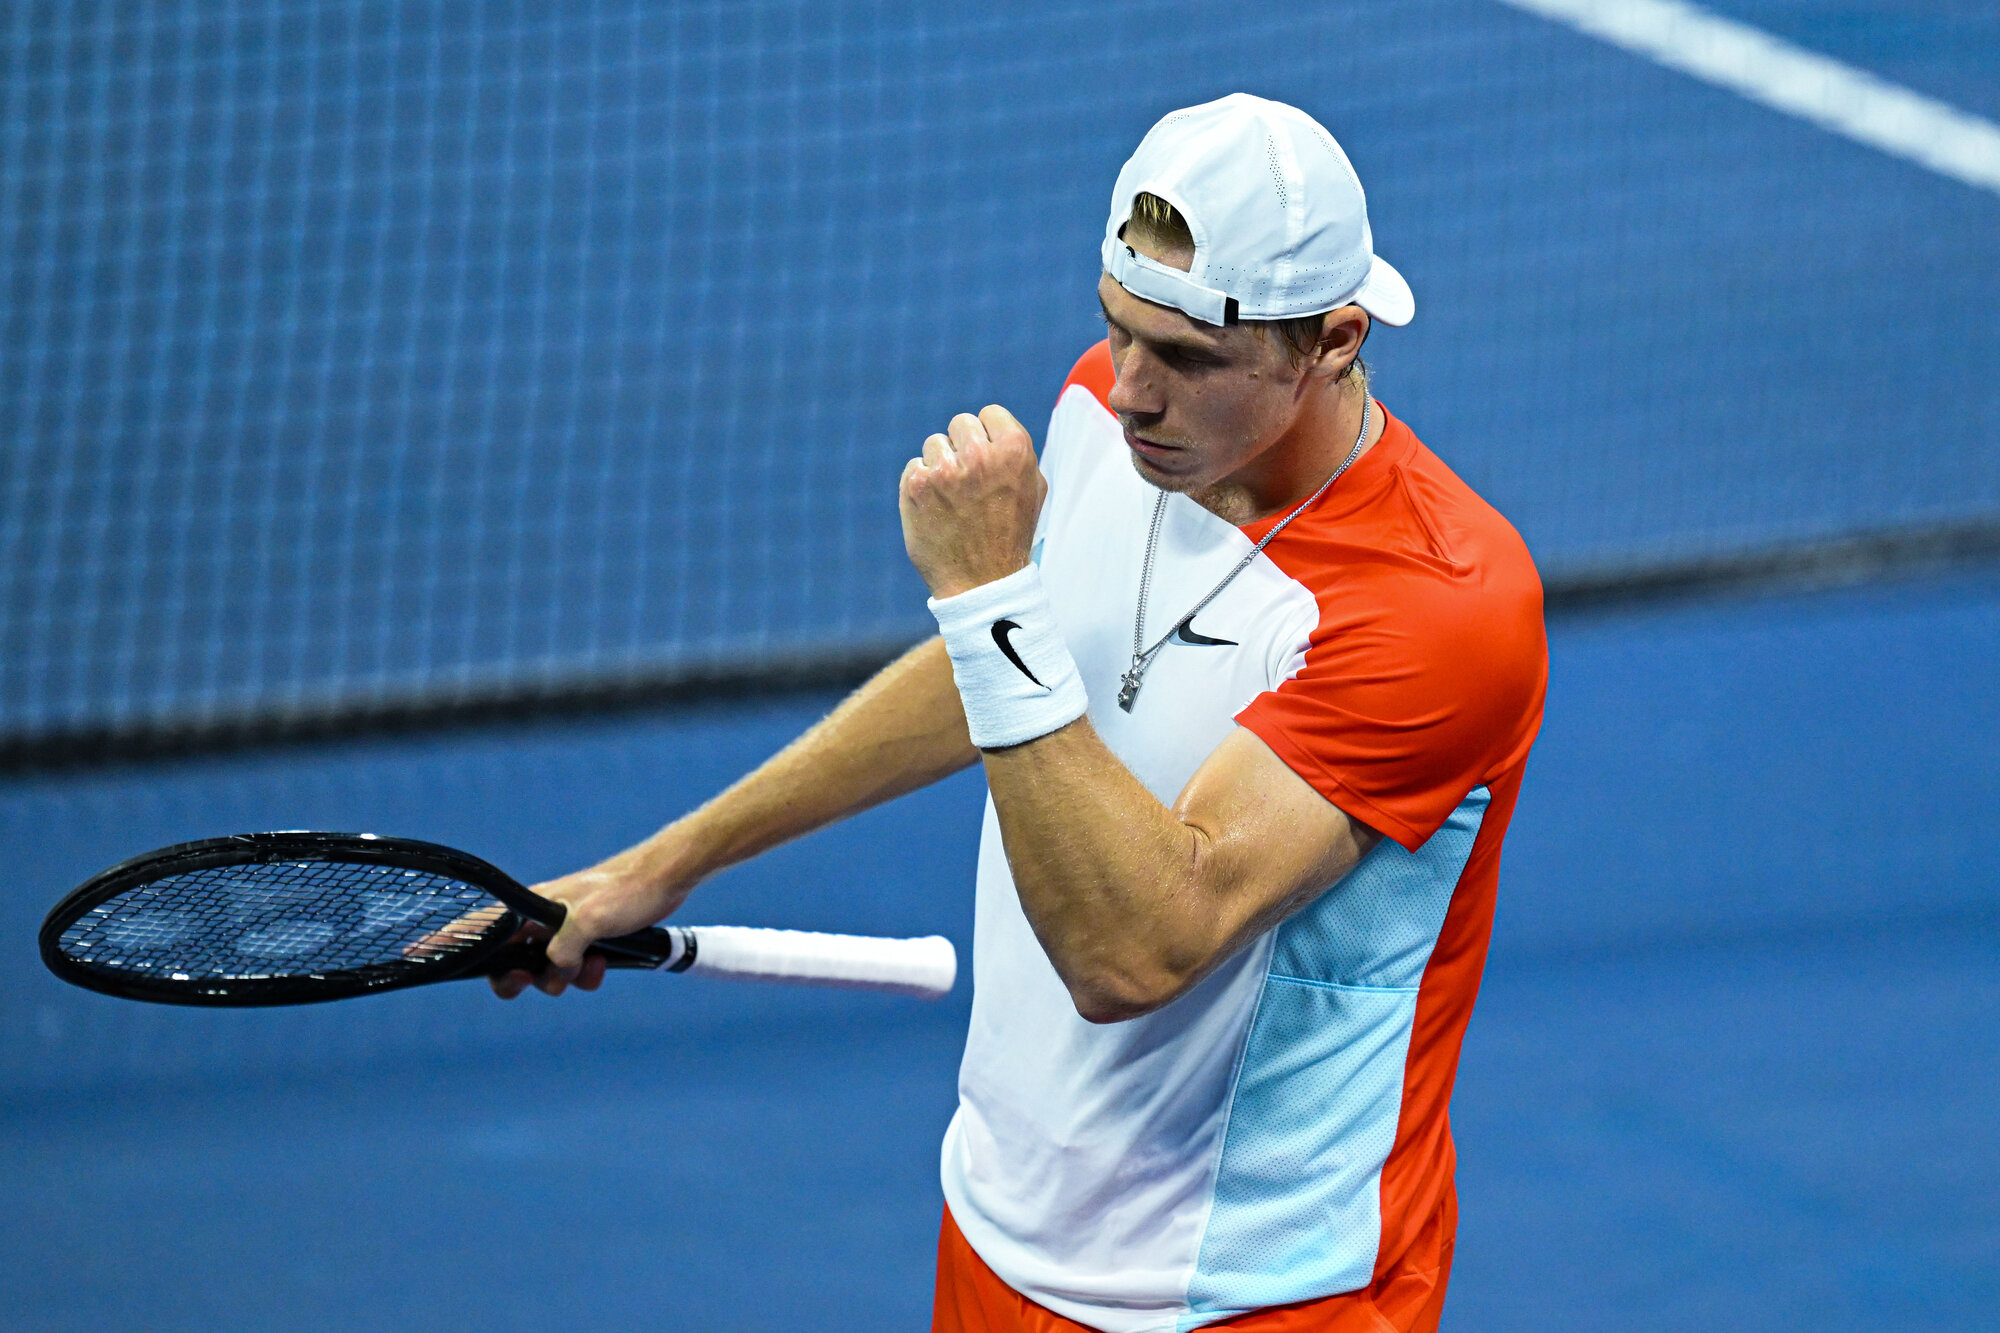 Shapovalov to Play for Seoul Title – Tennis Canada